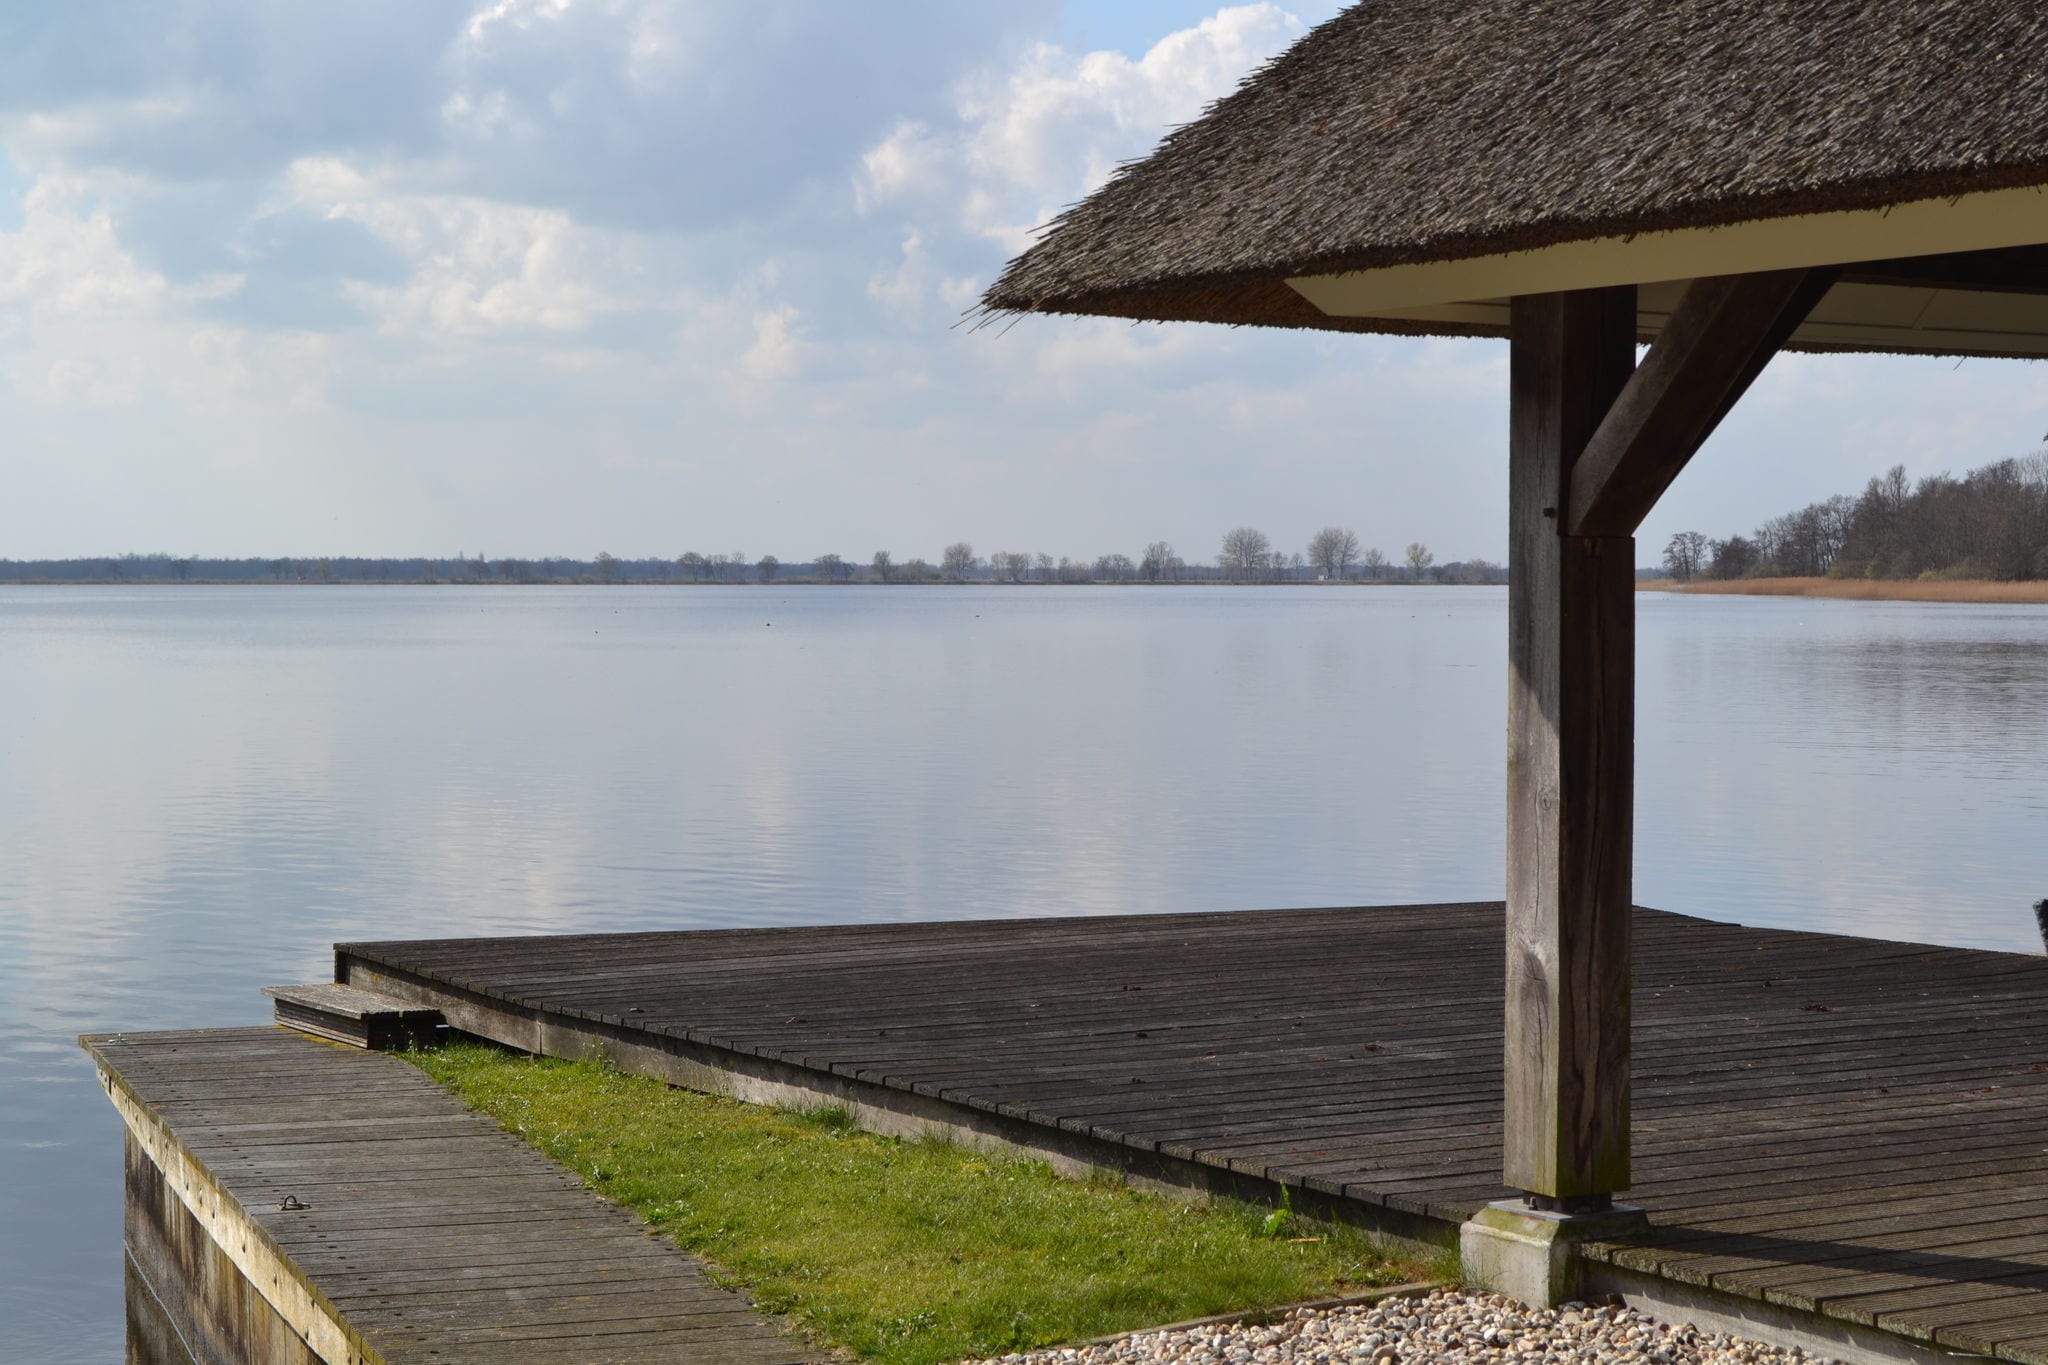 Stylish thatched villa with 2 bathrooms in a holiday park near Giethoorn